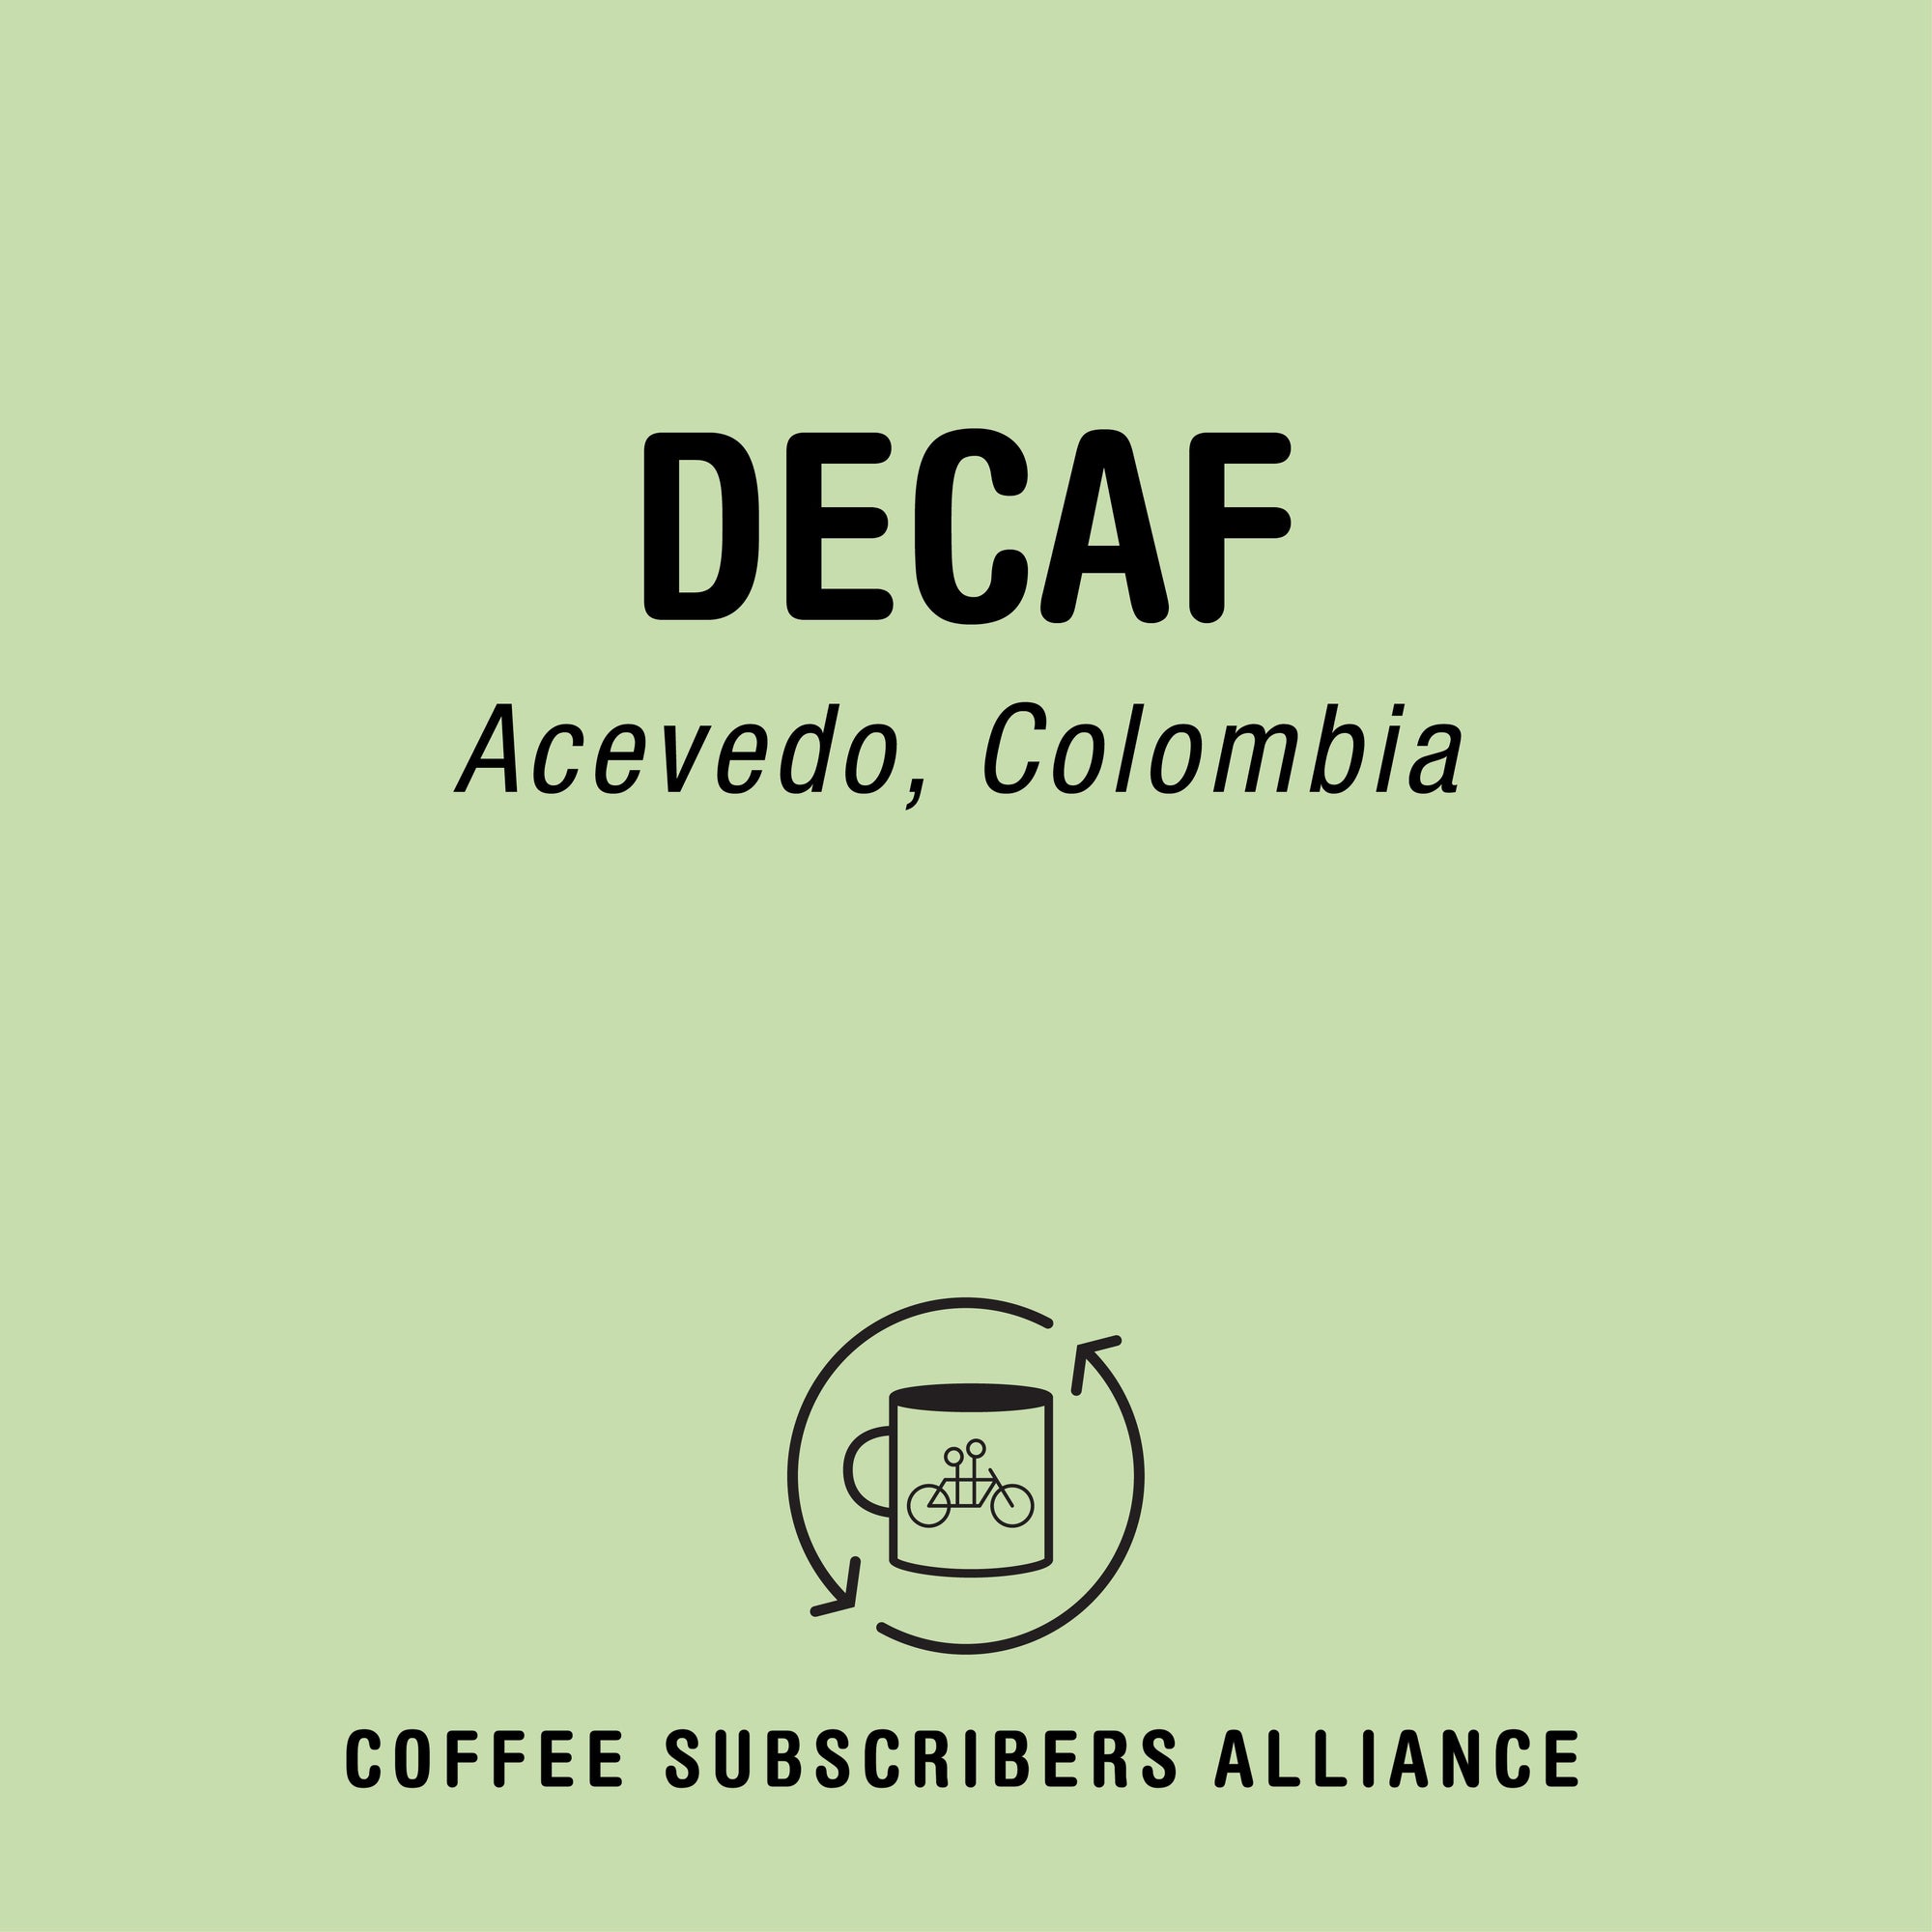 Label design for Tandem's Decaf Subscription Gift - 1 Week x 3 from Acevedo, Colombia by Coffee Subscribers Alliance, featuring simple text and a logo with a coffee cup motif on a soft green background.